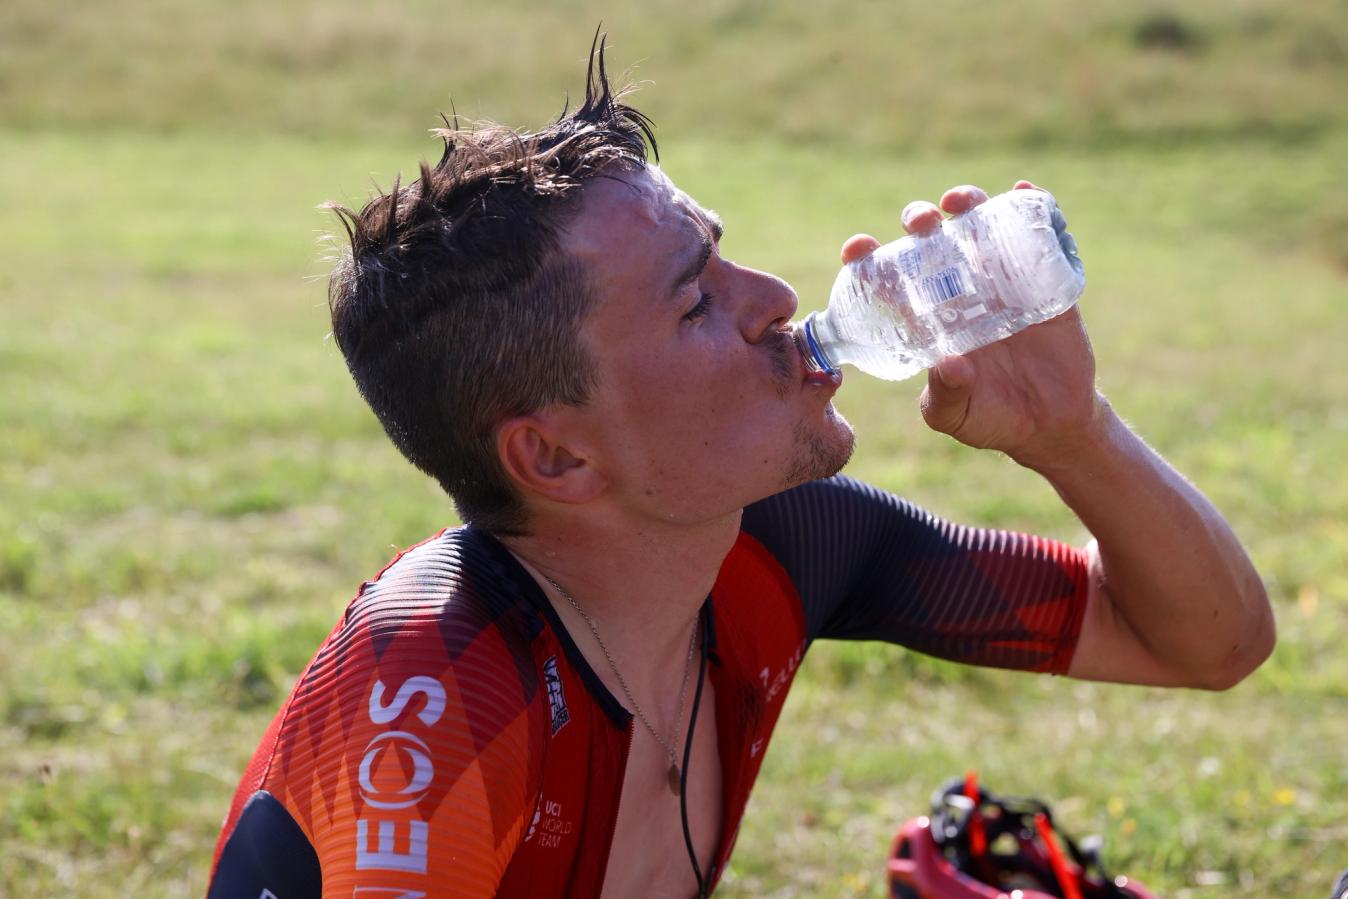 Recovering after a hot day on the Puy de Dôme, Tom Pidcock was grateful to have water immediately on hand